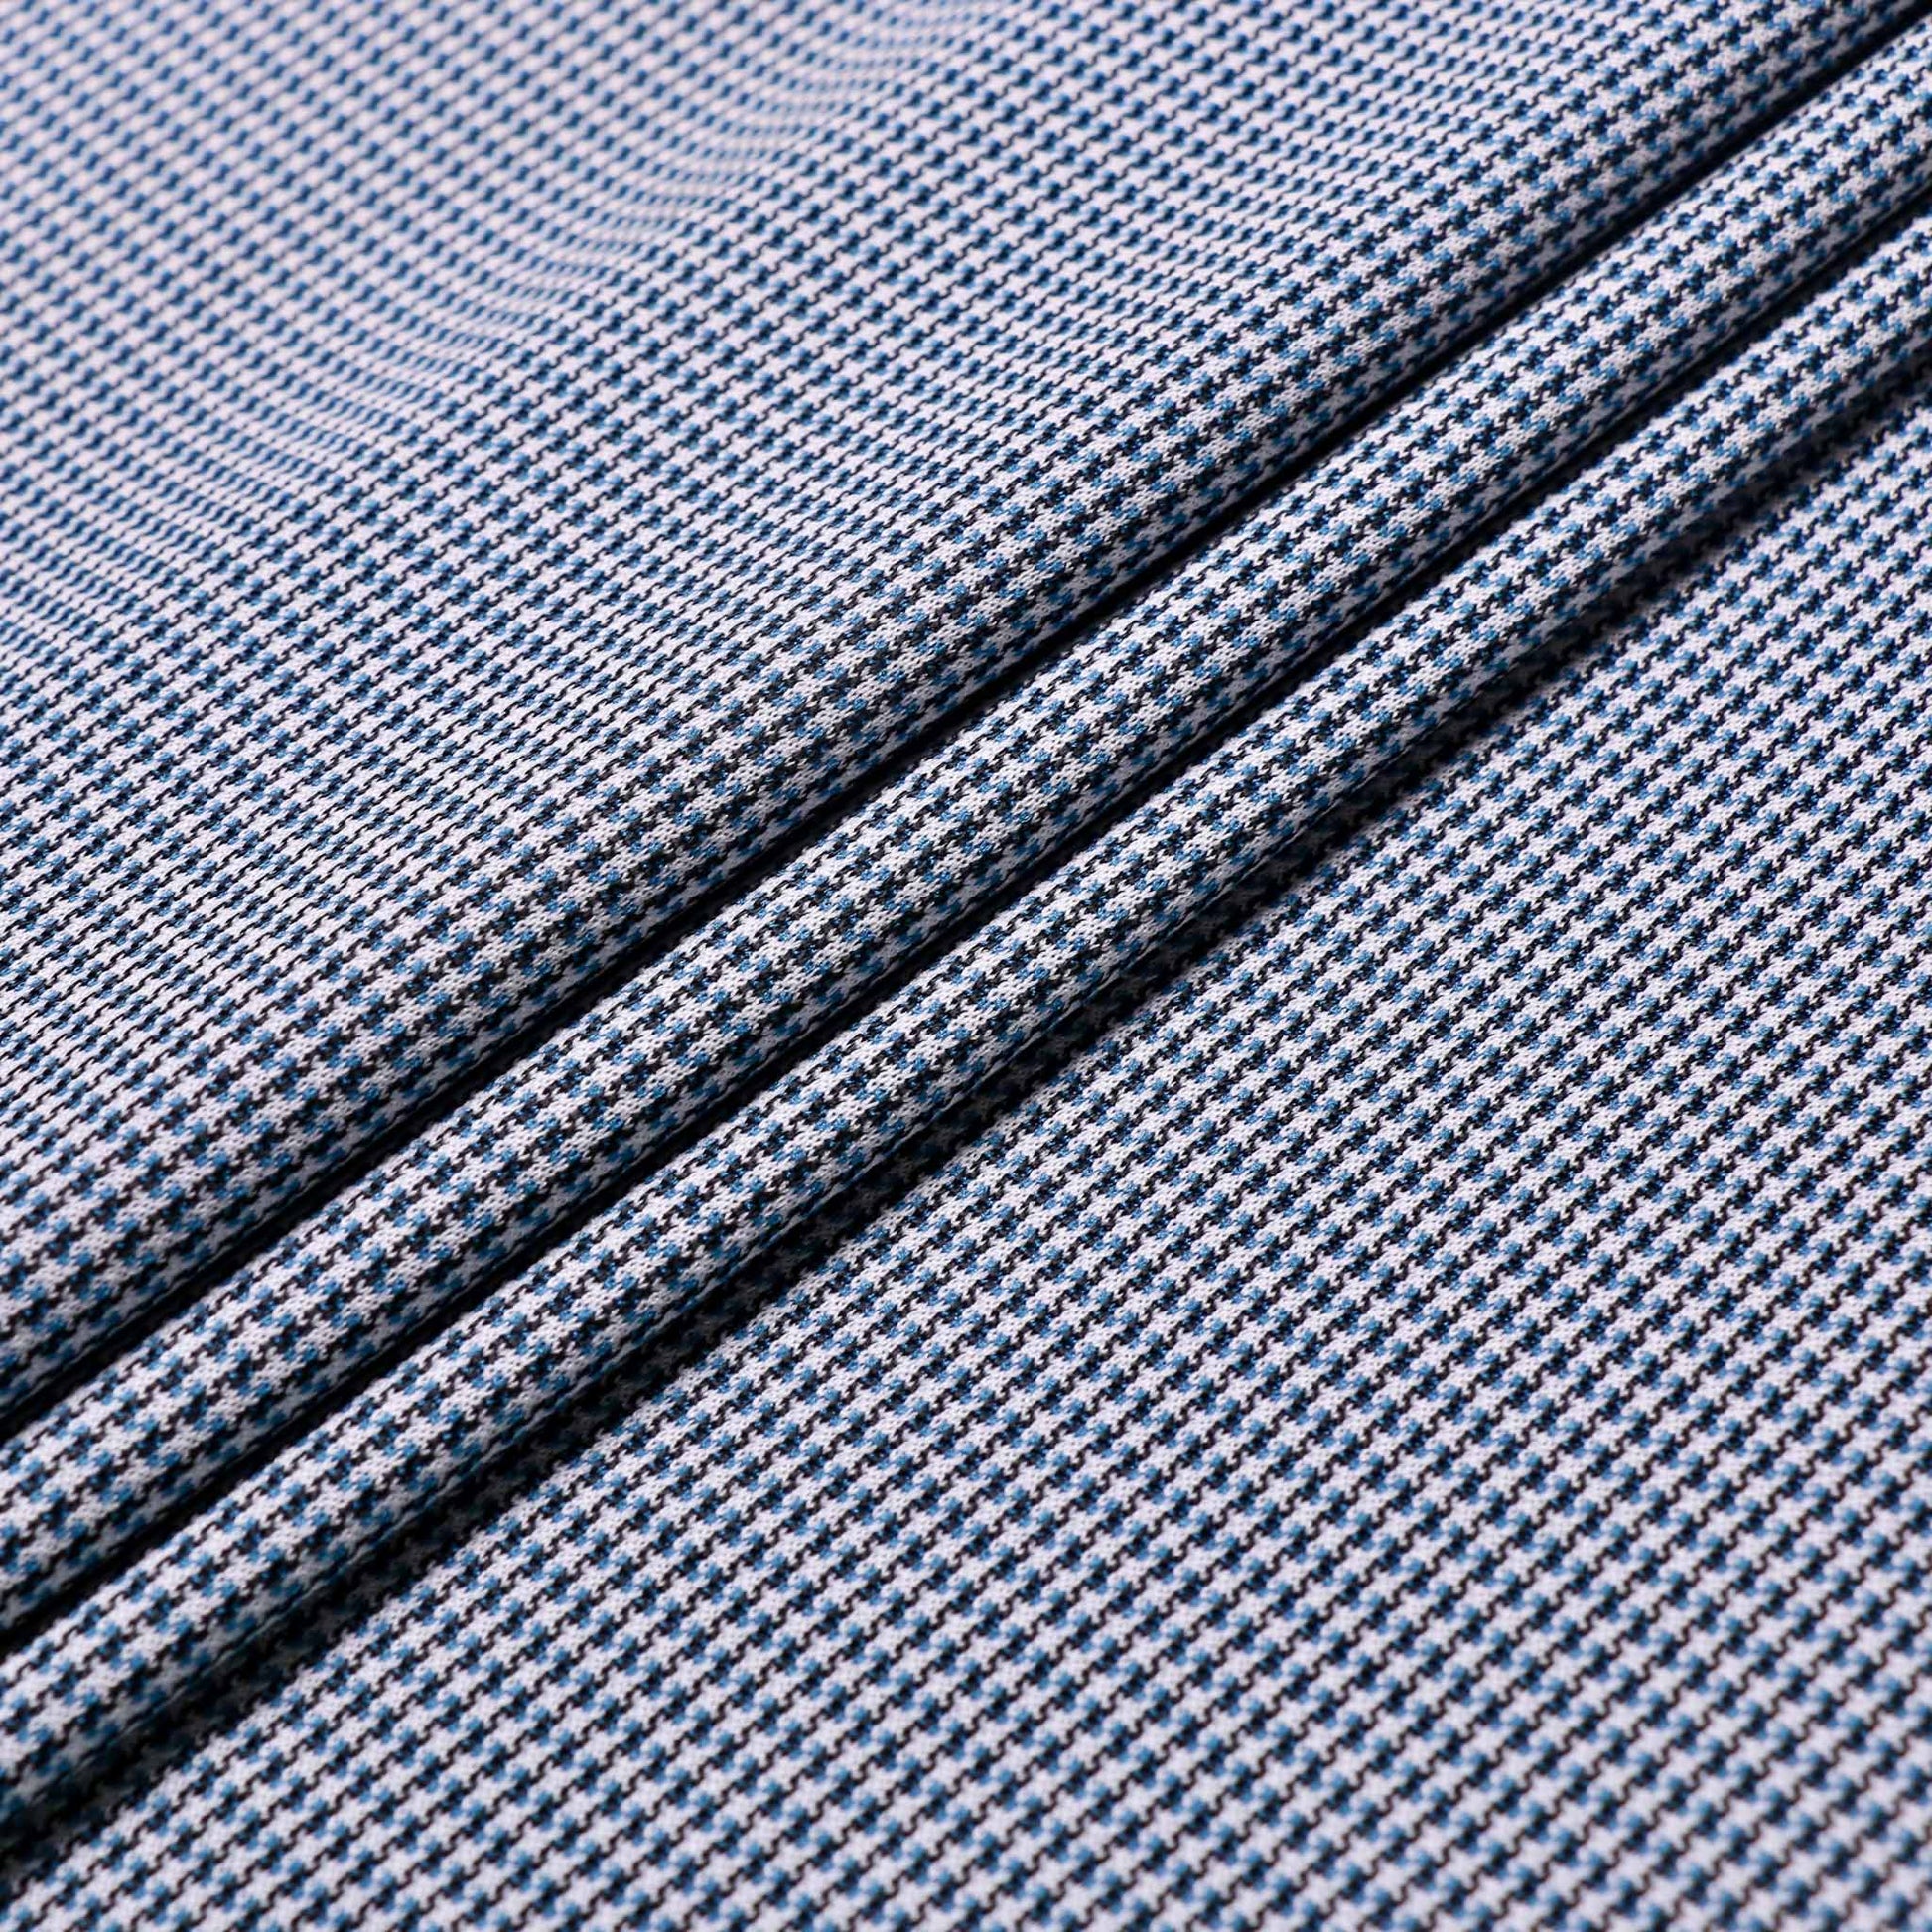 folded vintage eco friendly jersey dressmaking fabric in blue and white with houndstooth pattern